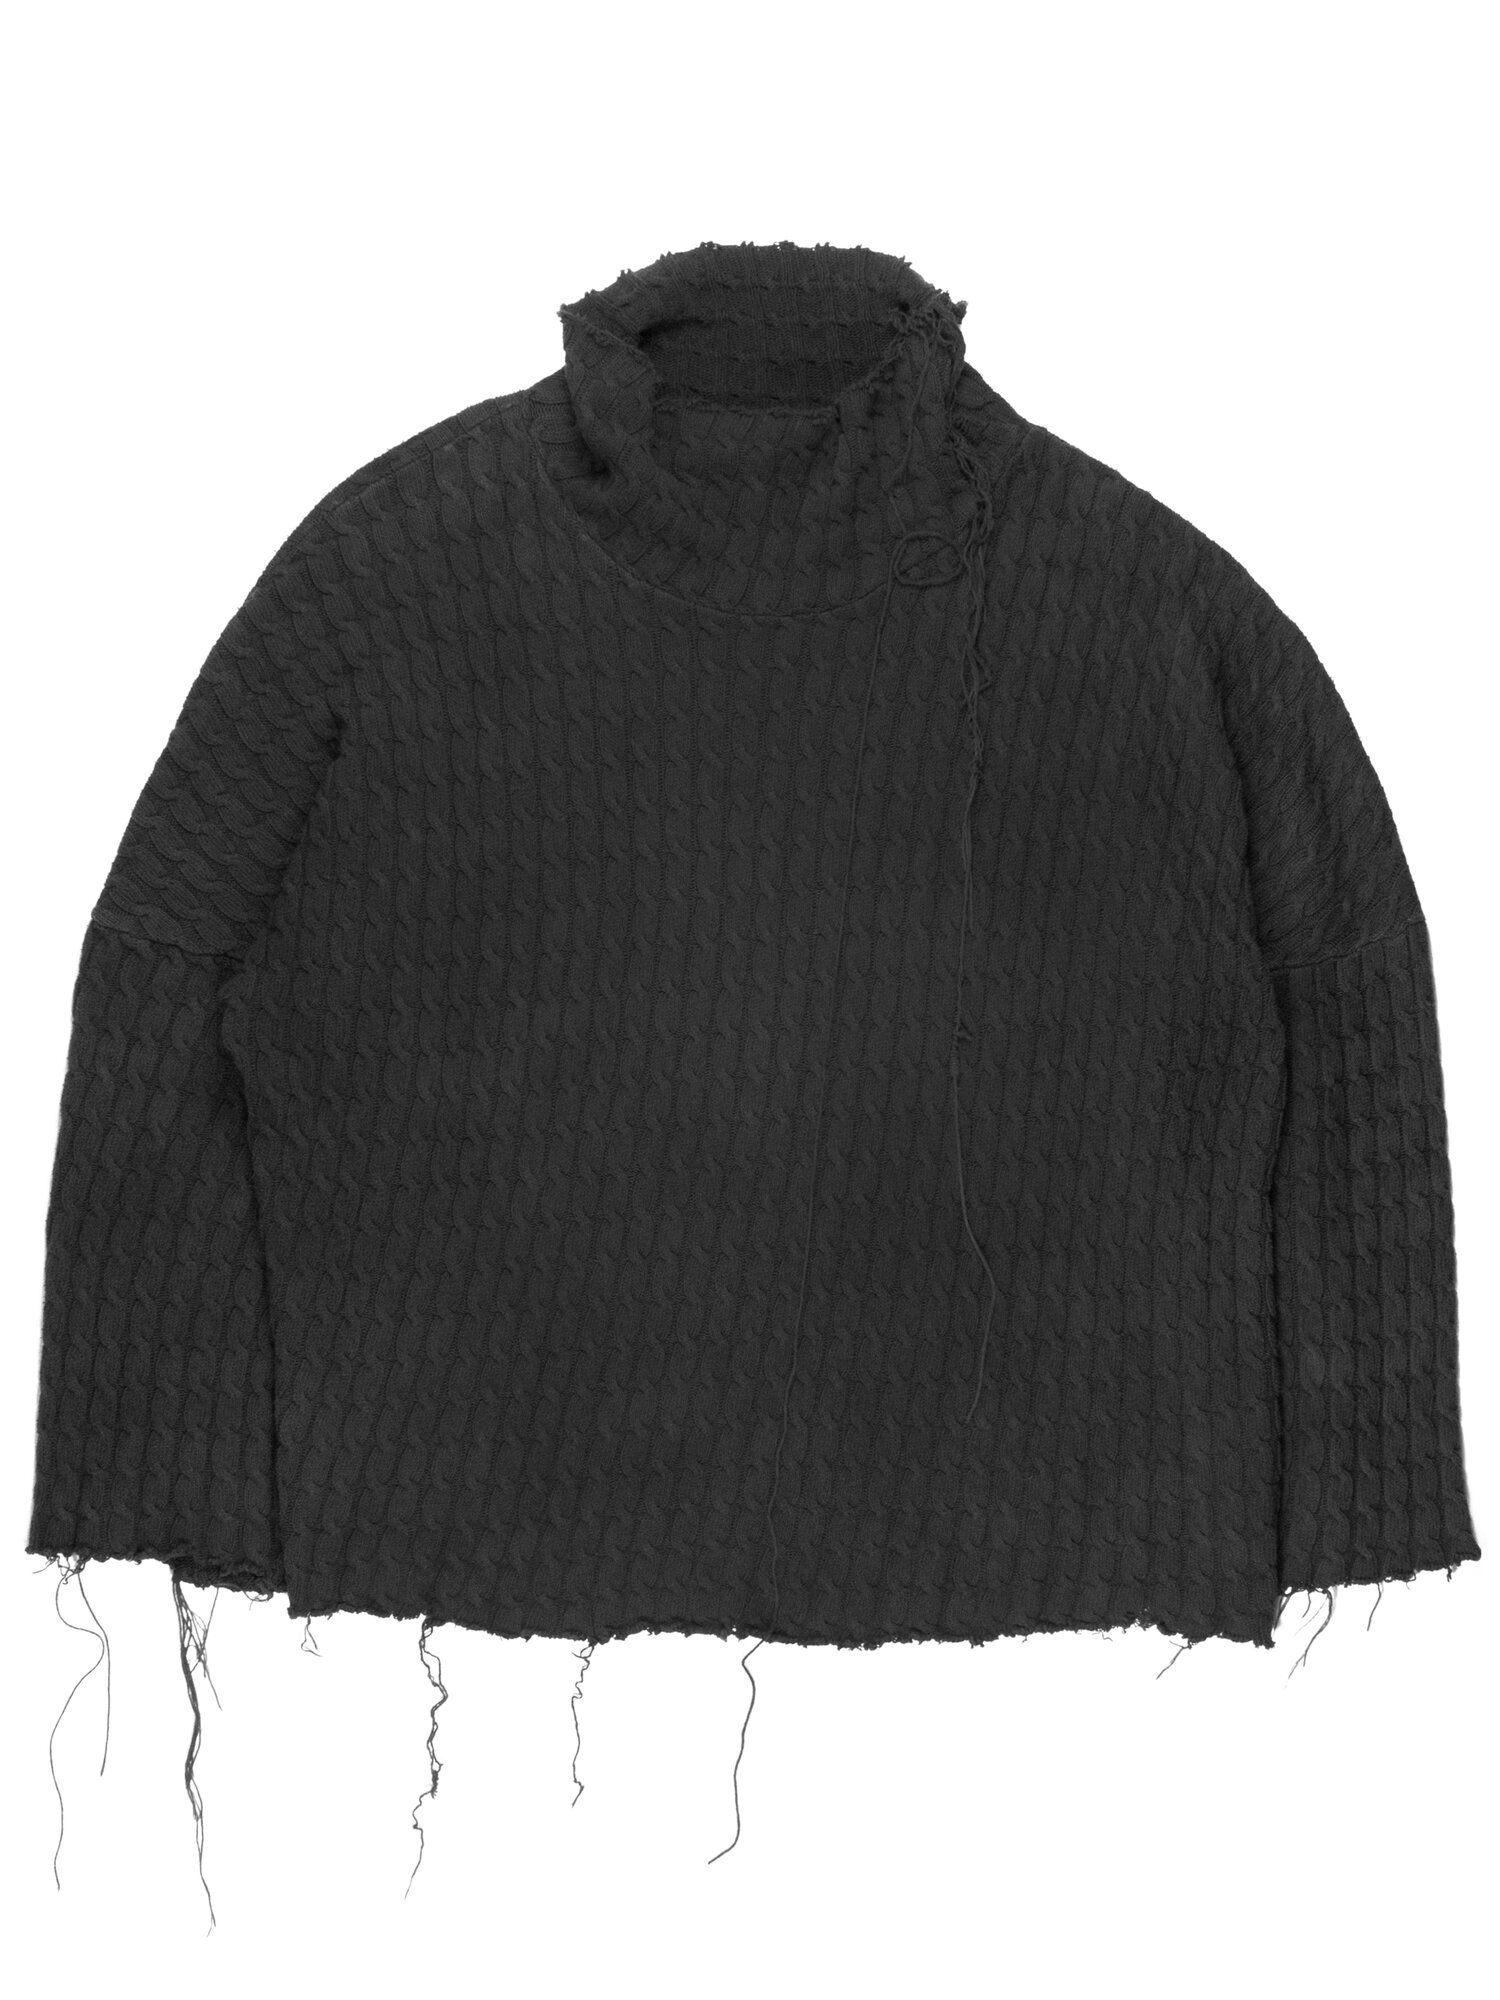 Raf Simons AW2002 Oversized Distressed Sweater — Middleman Store